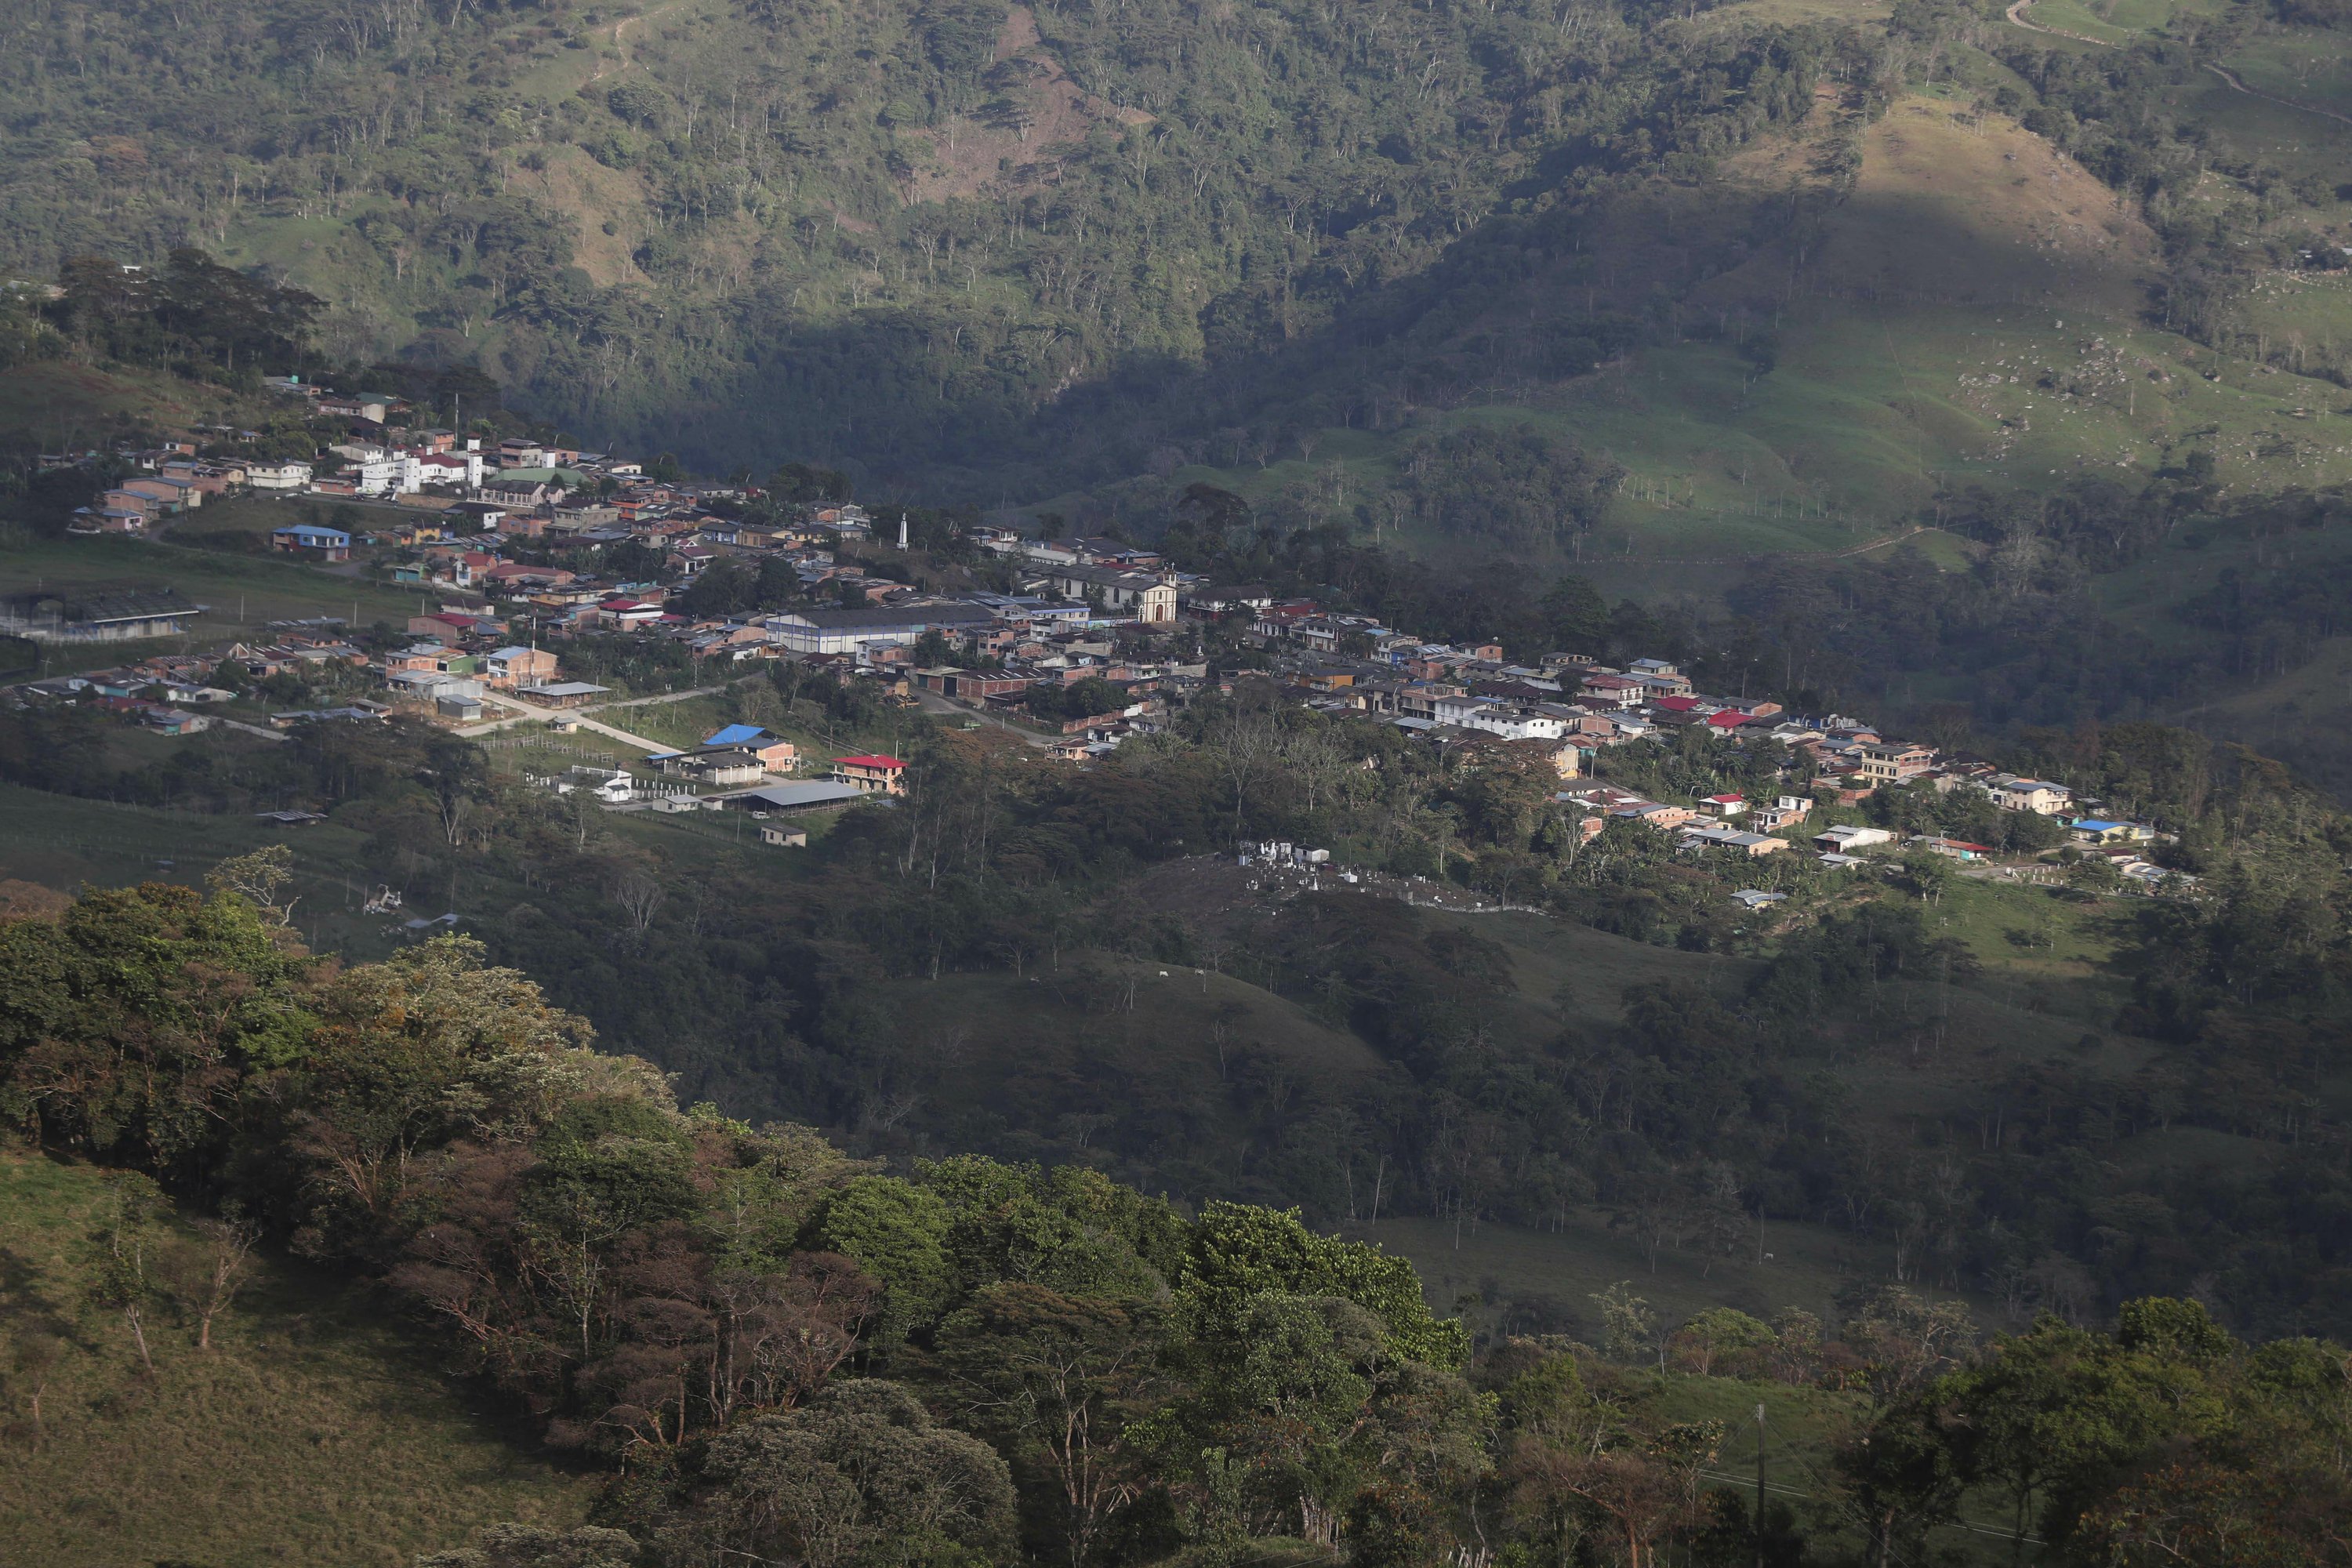 Colombian city uses discipline and speakers to stay virus free